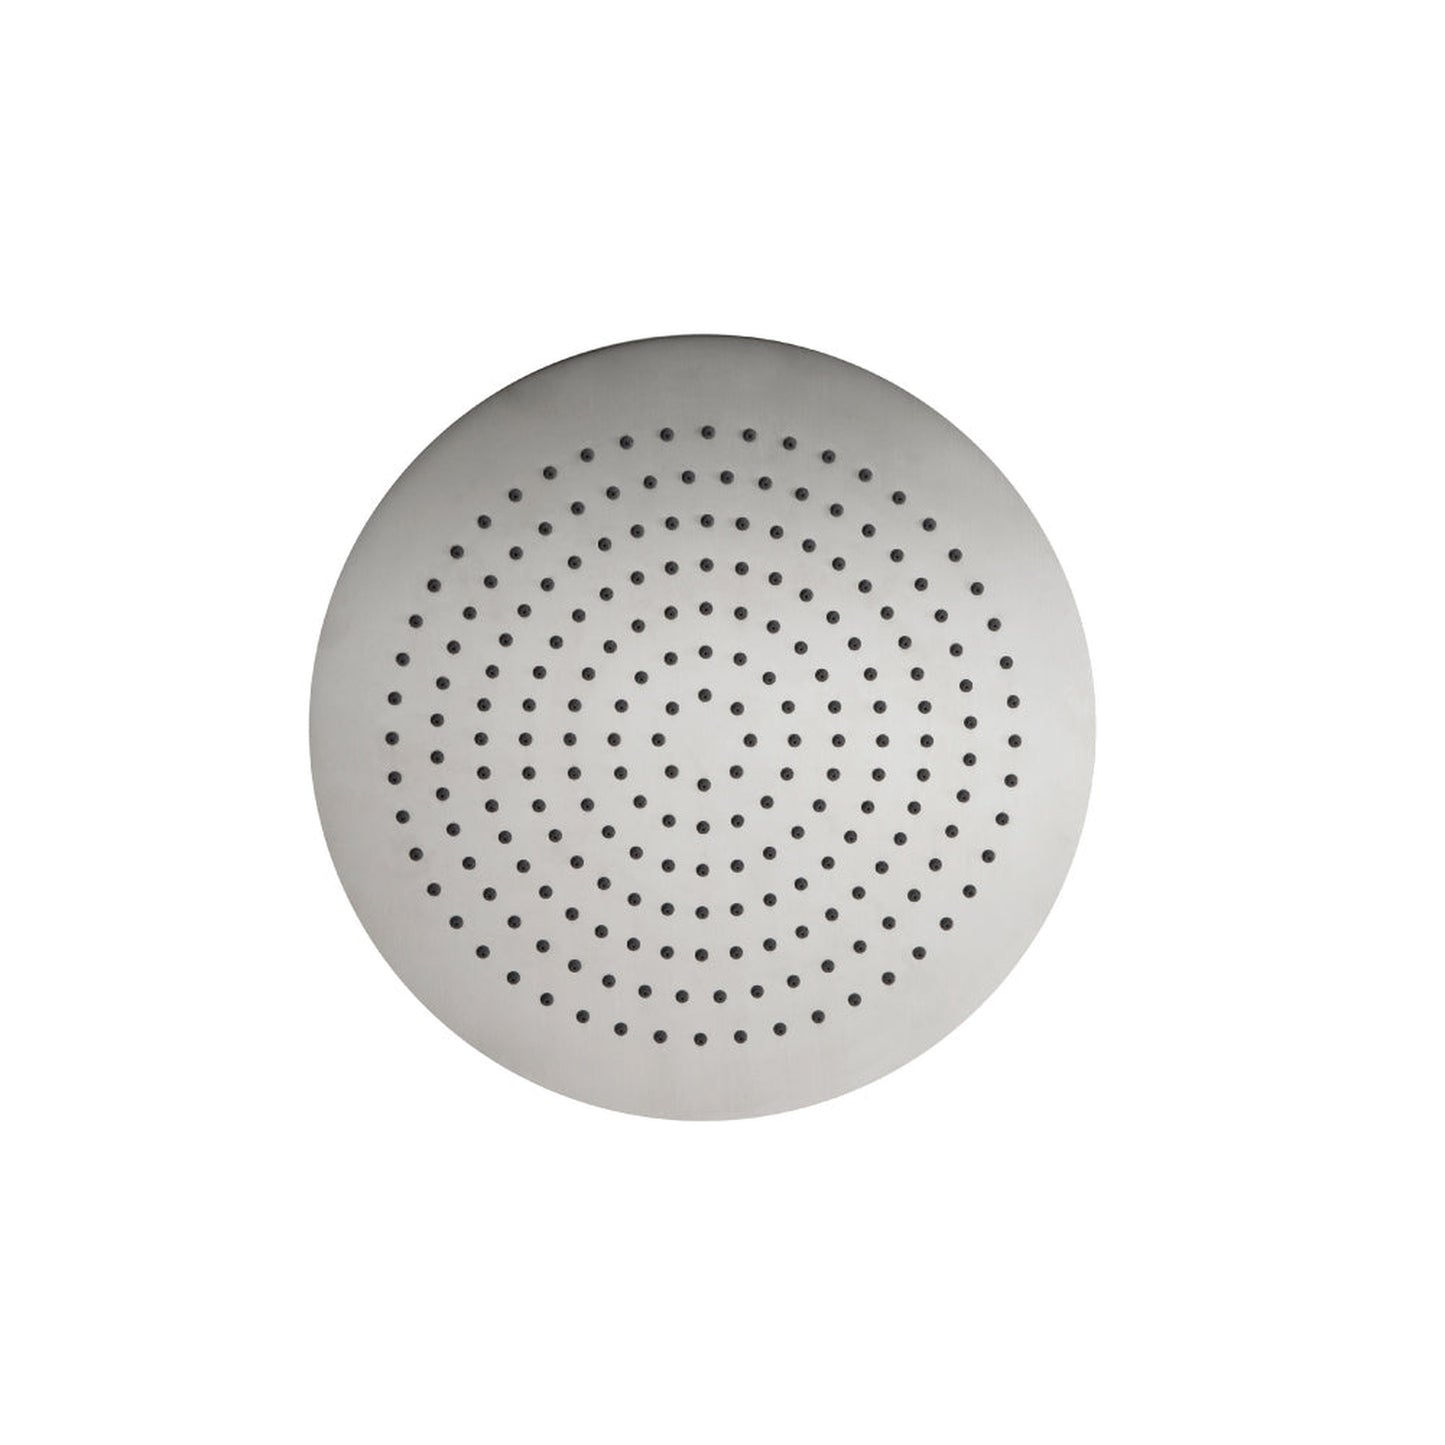 Isenberg Universal Fixtures 10" Single Function Round Brushed Nickel PVD Solid Brass Rain Shower Head